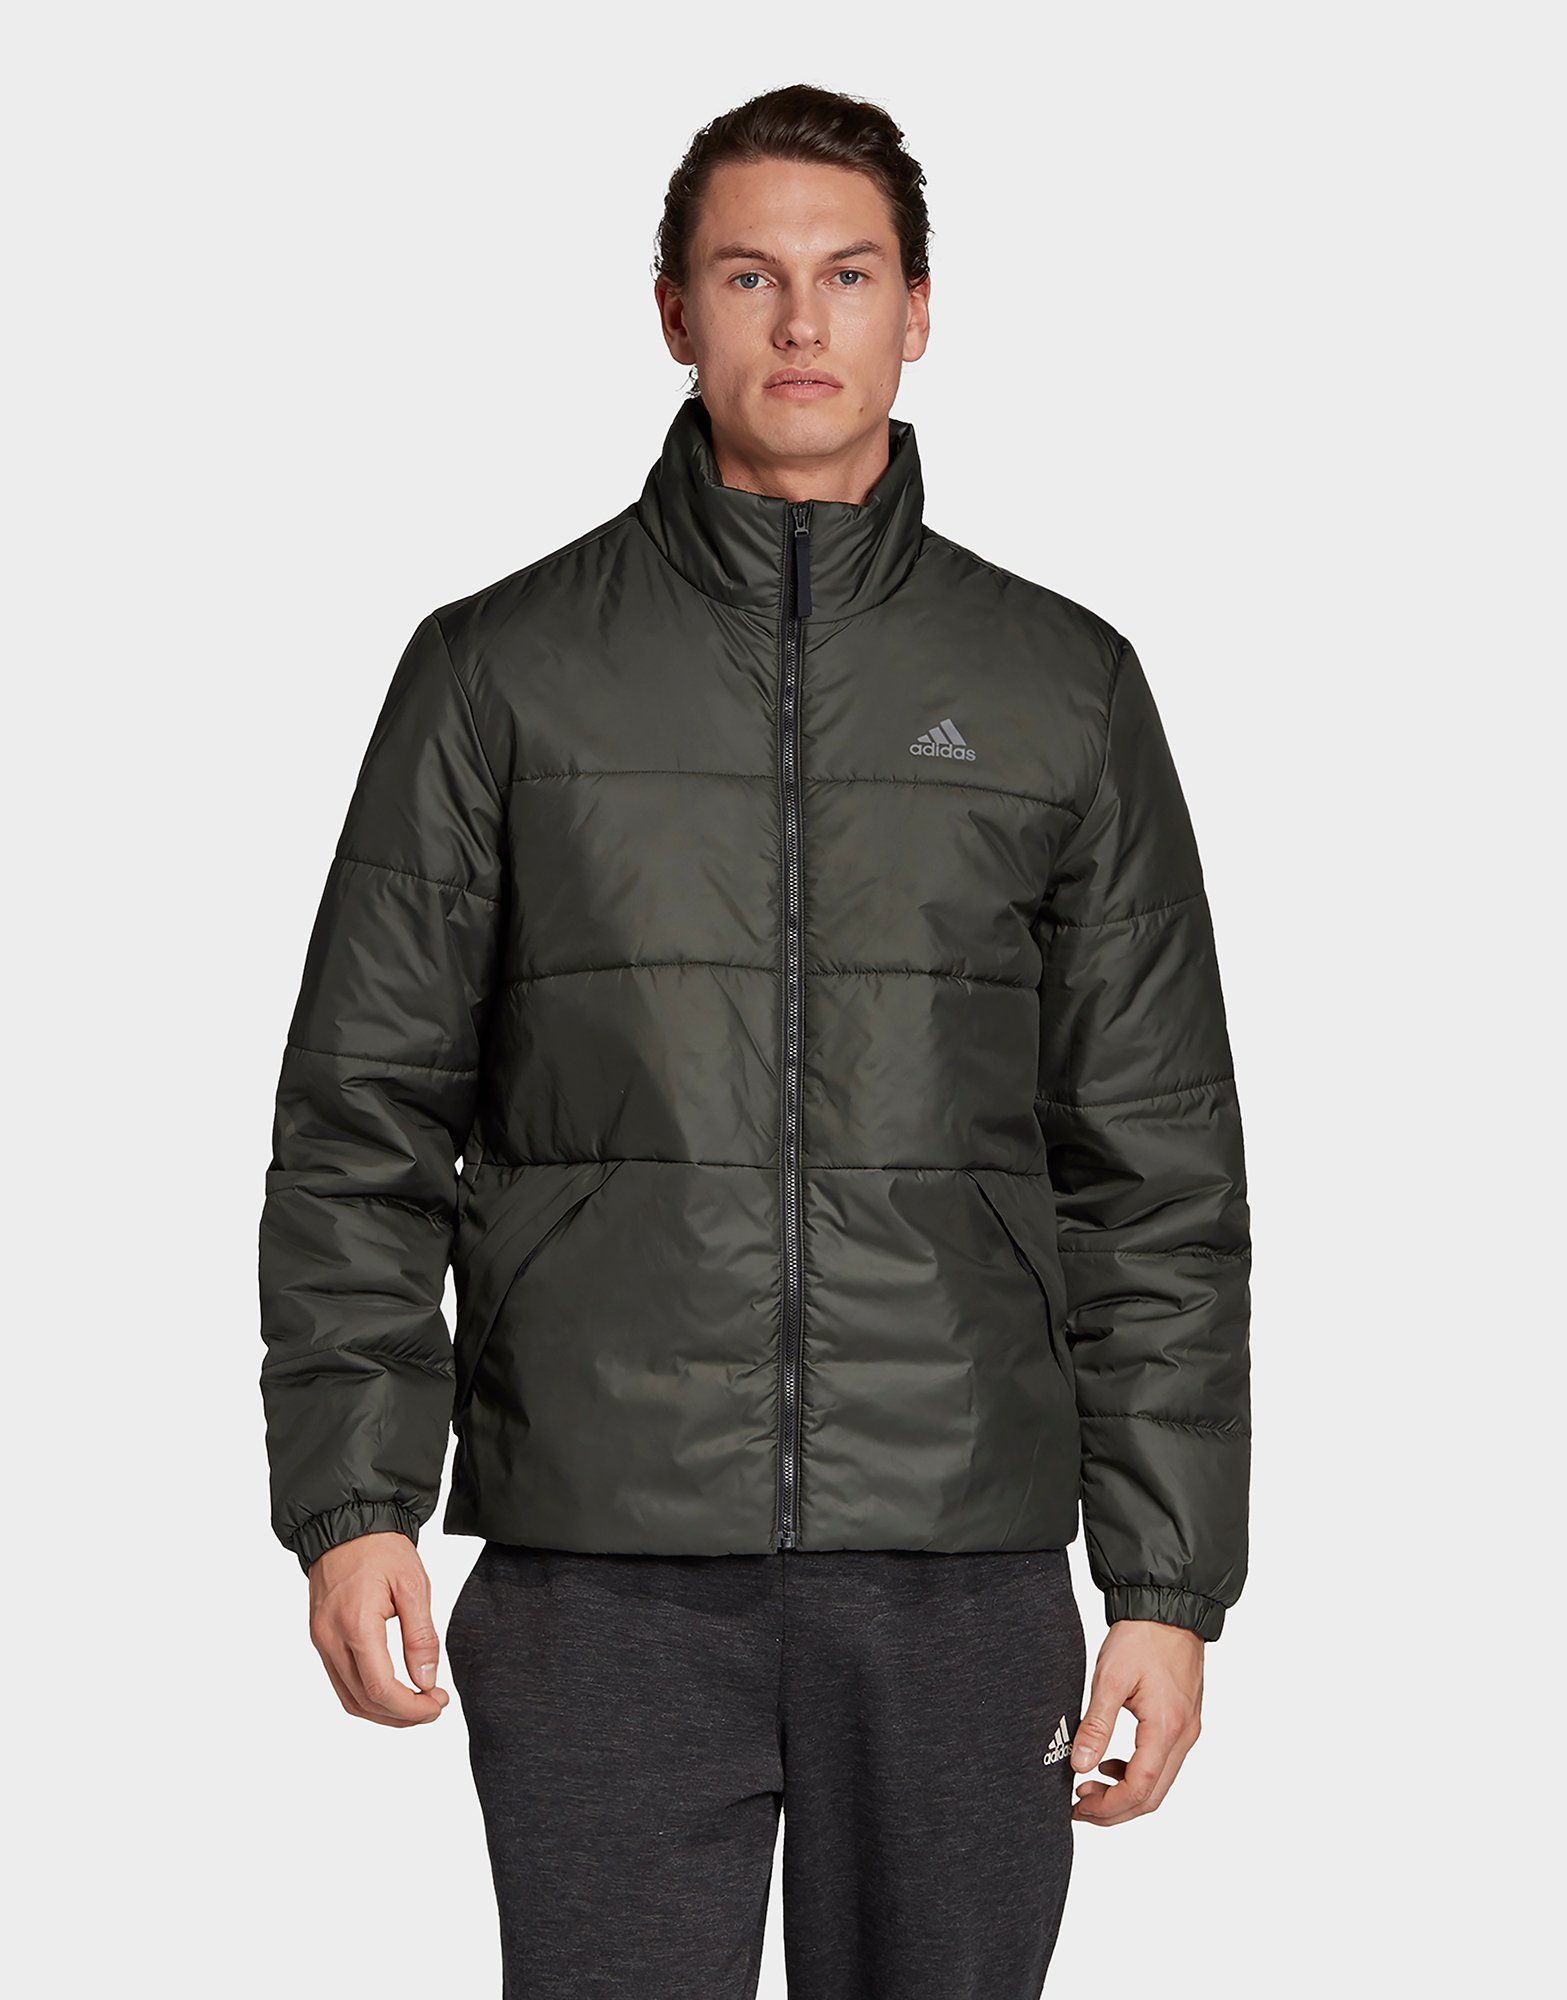 adidas Performance BSC 3-Stripes Insulated Jacket | JD Sports